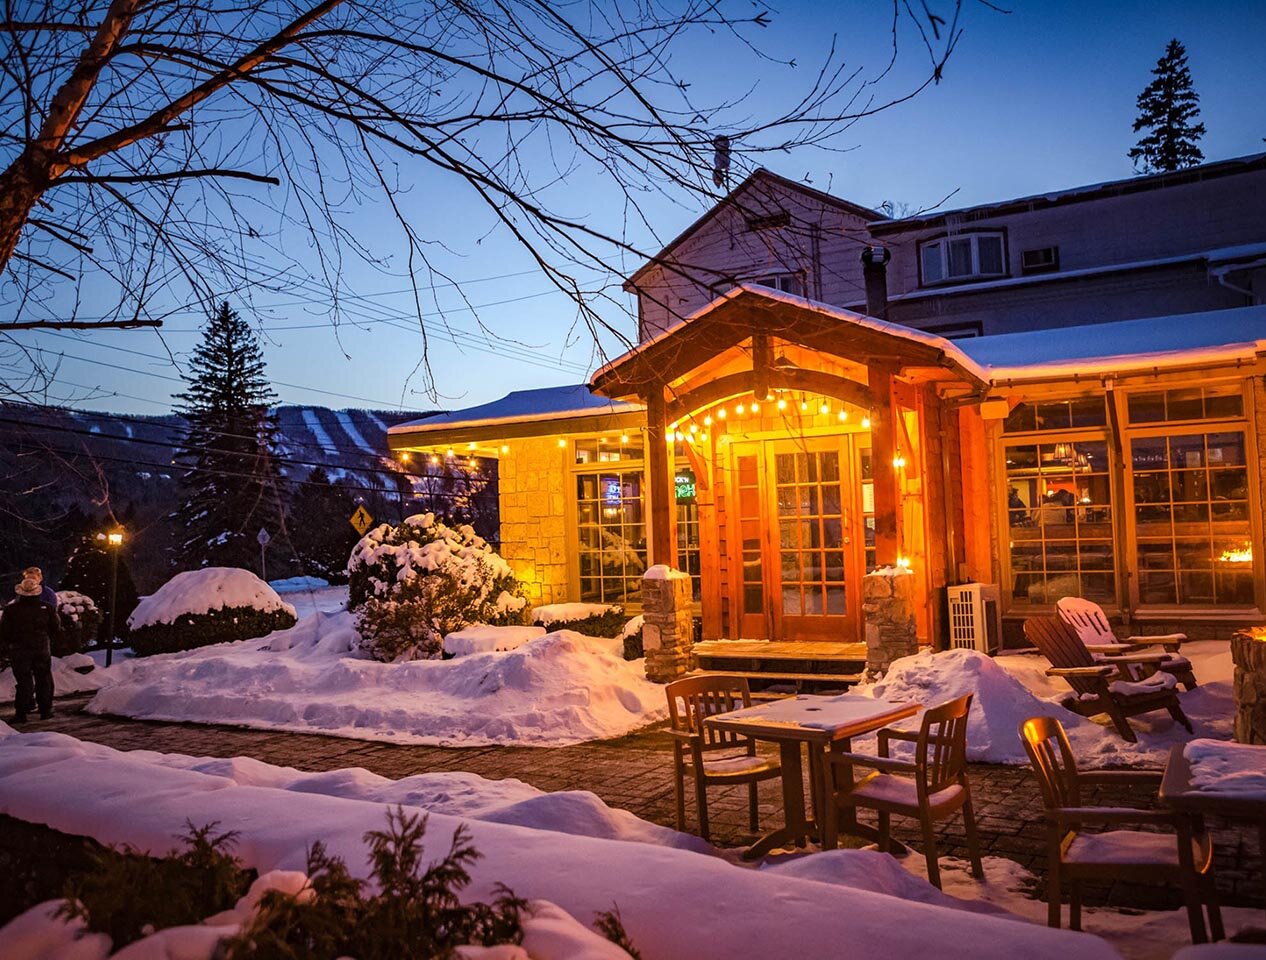 The exterior of the Clubhouse at Windham Mountain, dusted with show and lit up for the evening.